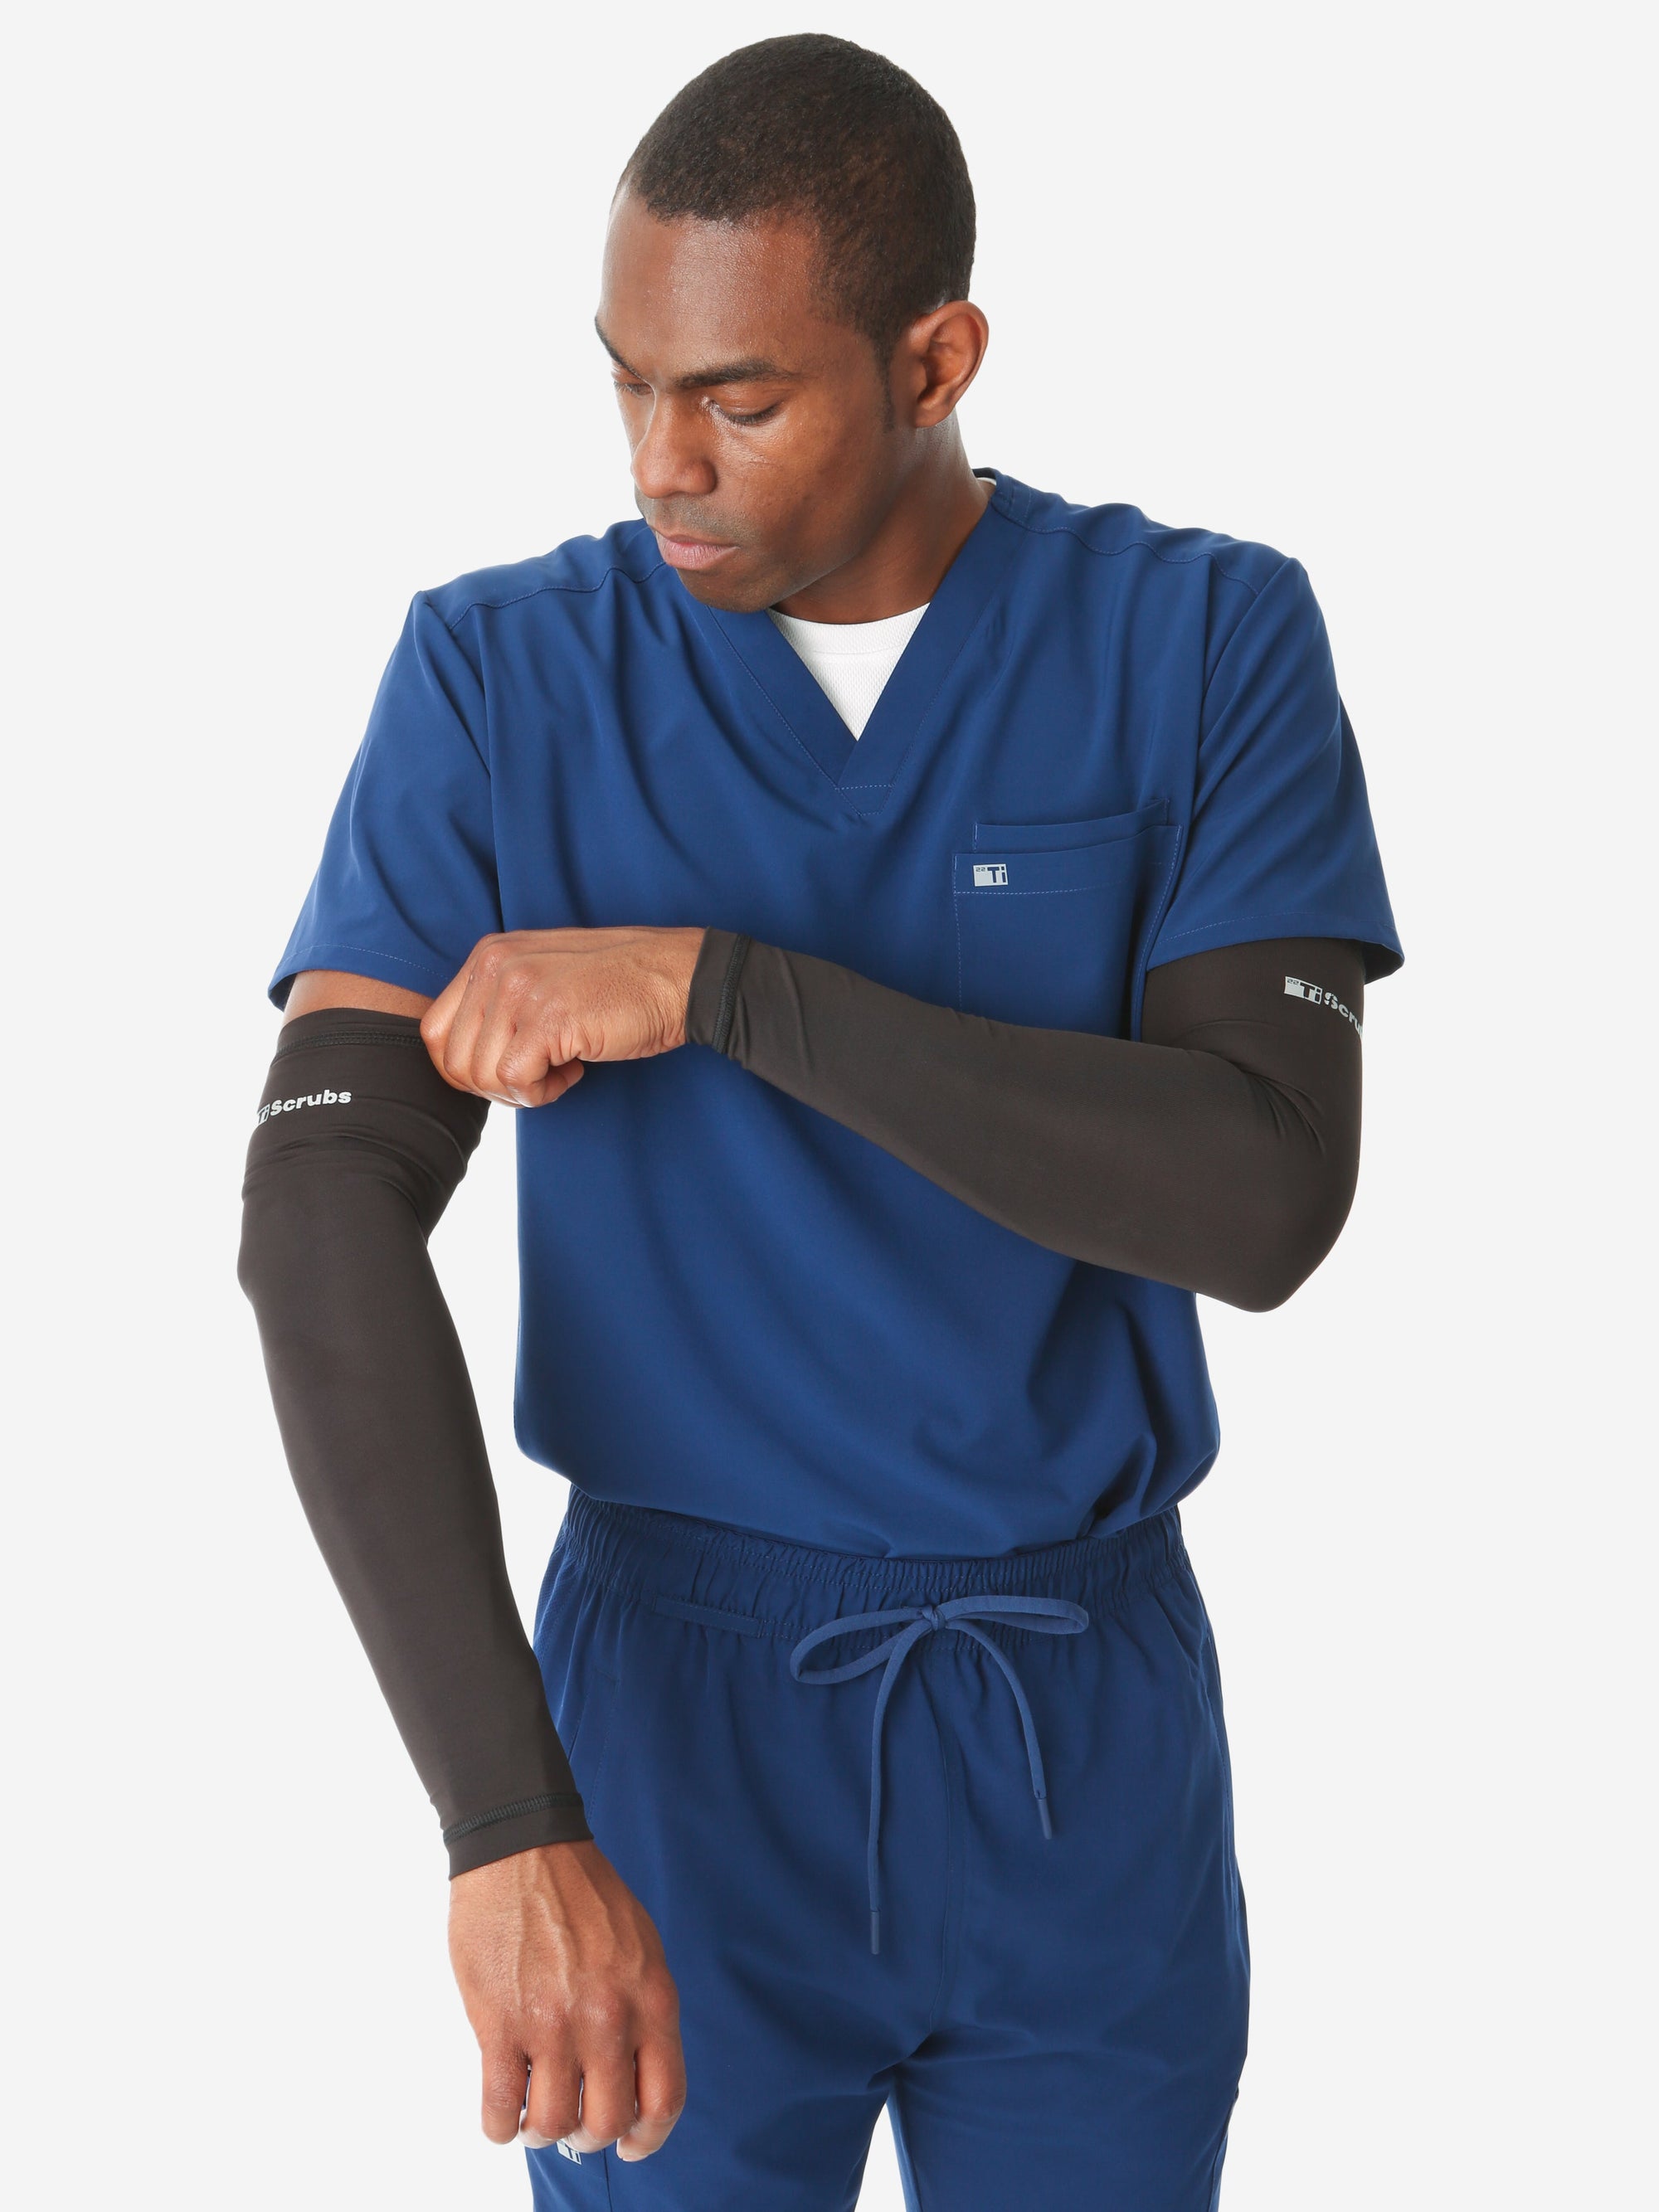 Real Black Medical Arm Sleeve Covers